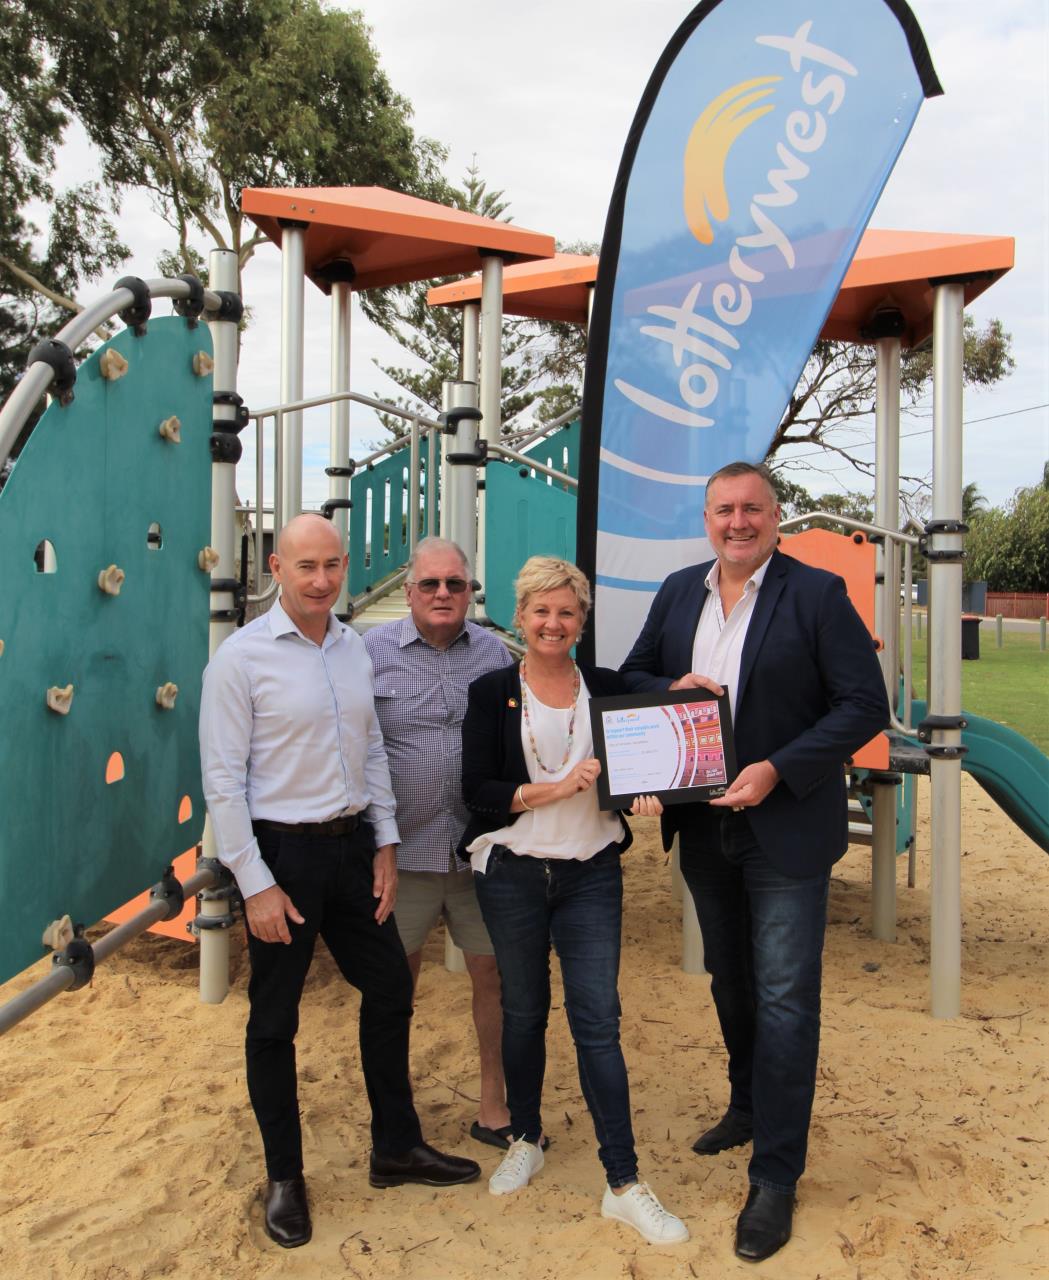 Lara Dalton MLA hands a Lotterywest cheque for $1,445,572 to Mayor Shane Van Styn to fund upgrades to the AMC Park in Spalding. Joining them are City of Greater Geraldton Director Infrastructure Services Chris Lee (left) and Councillor Bob Hall. 